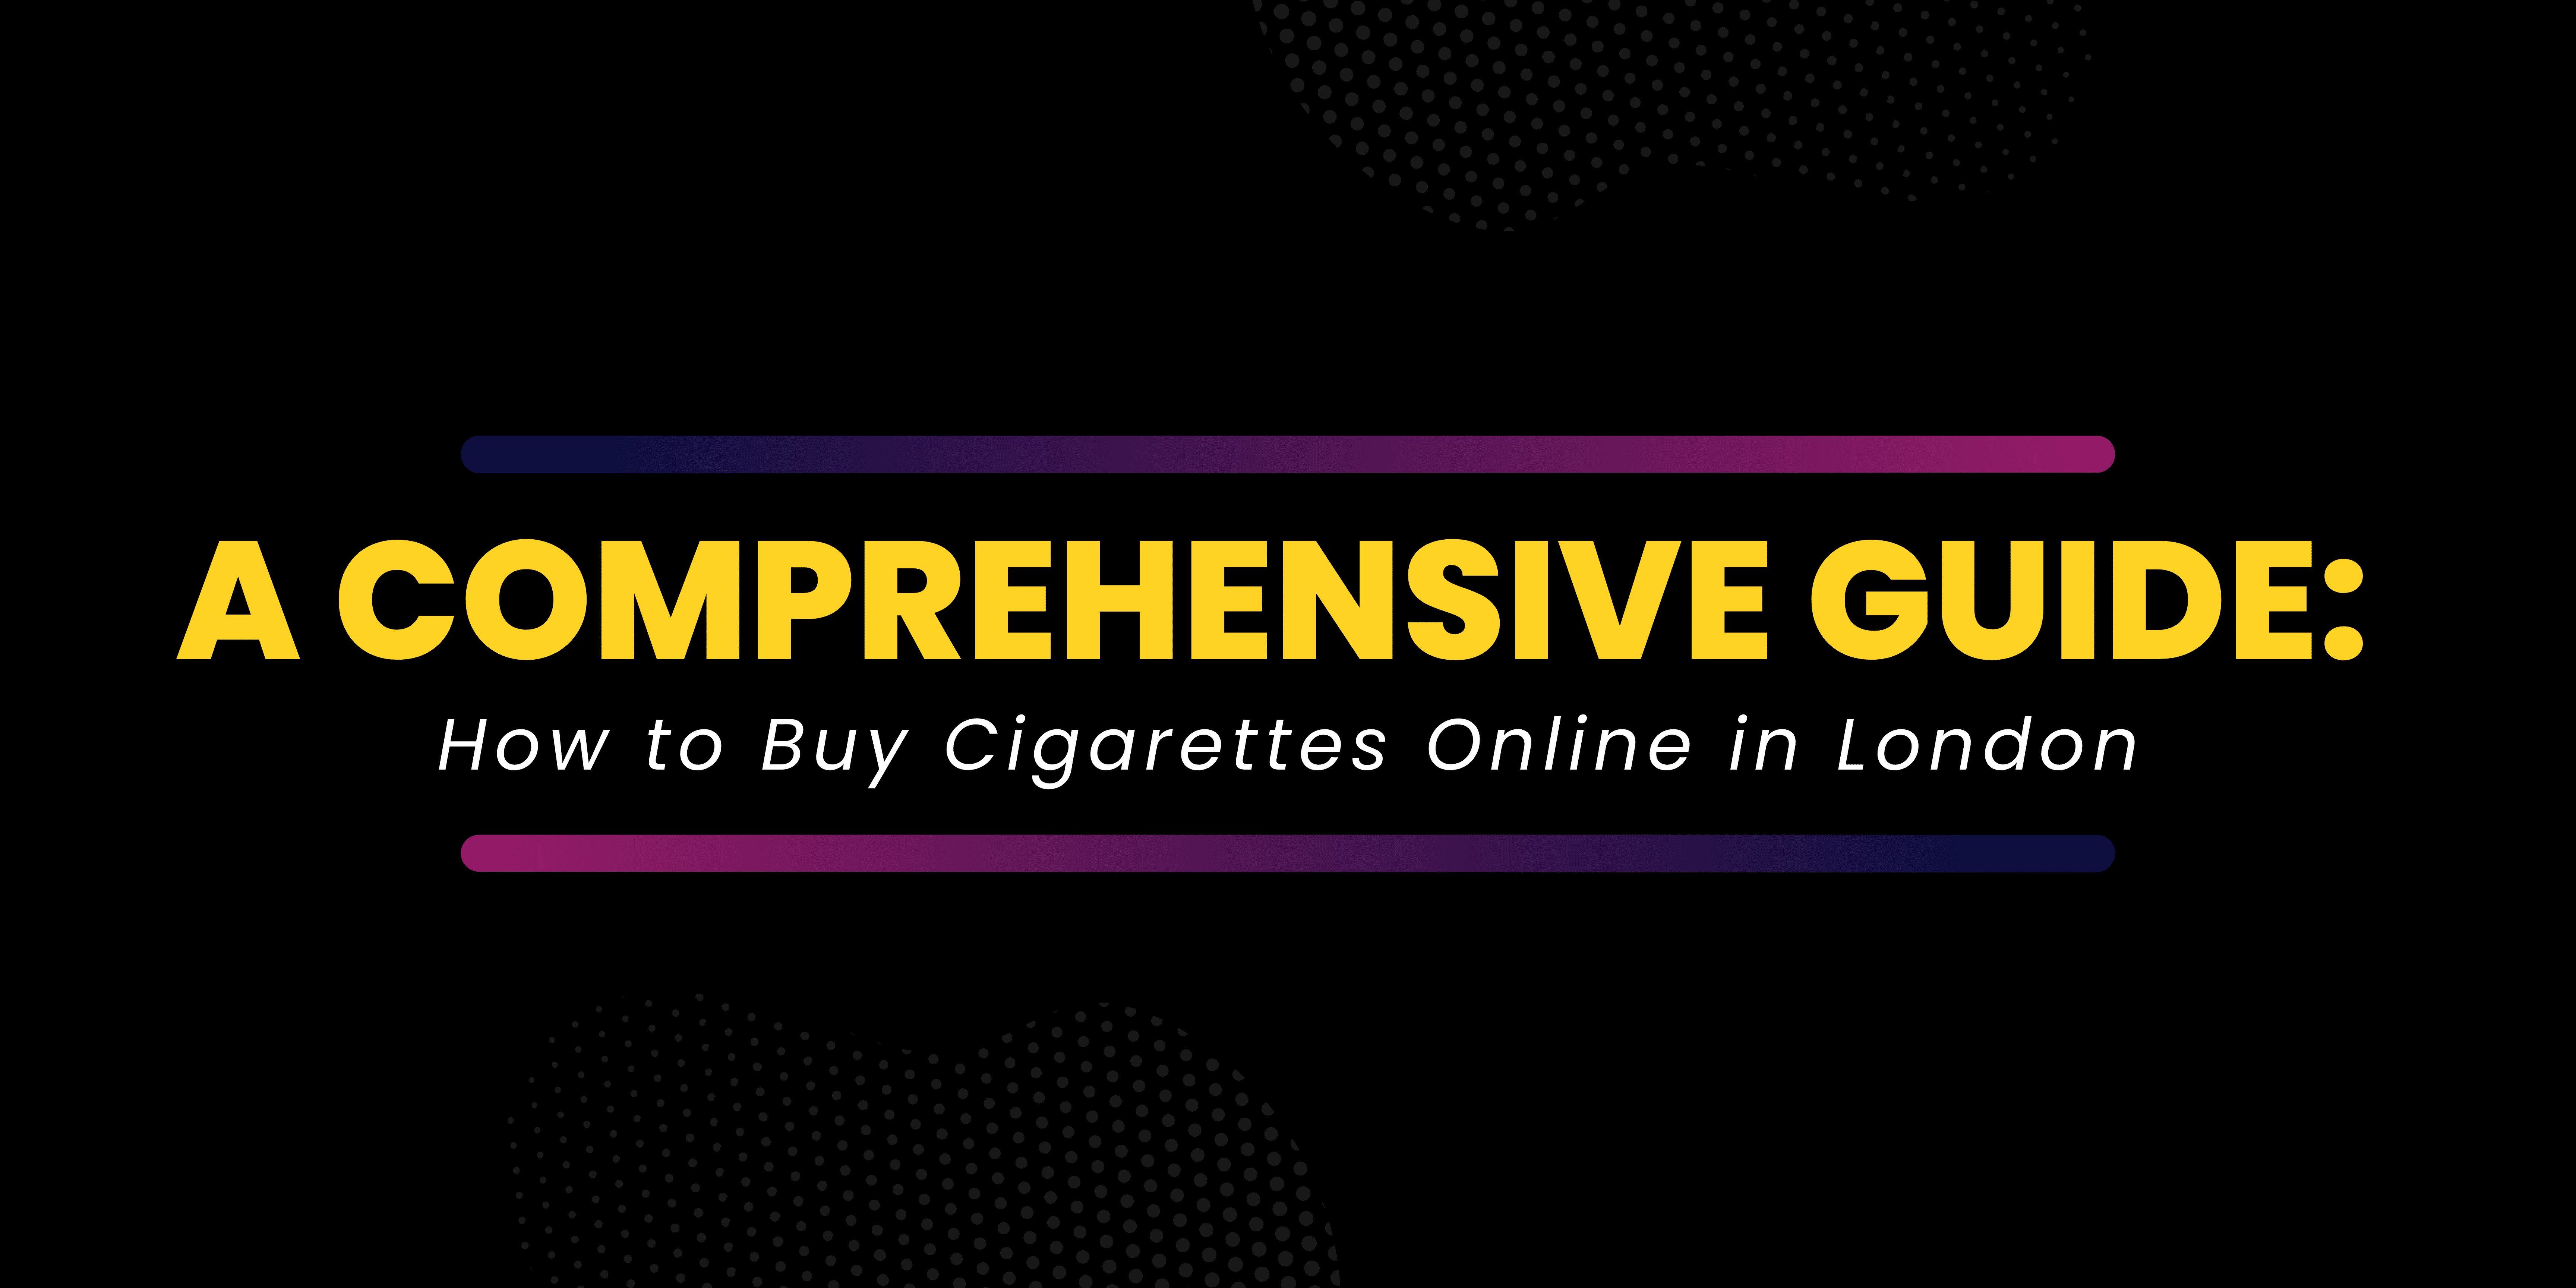 A Comprehensive Guide: How to Buy Cigarettes Online in London